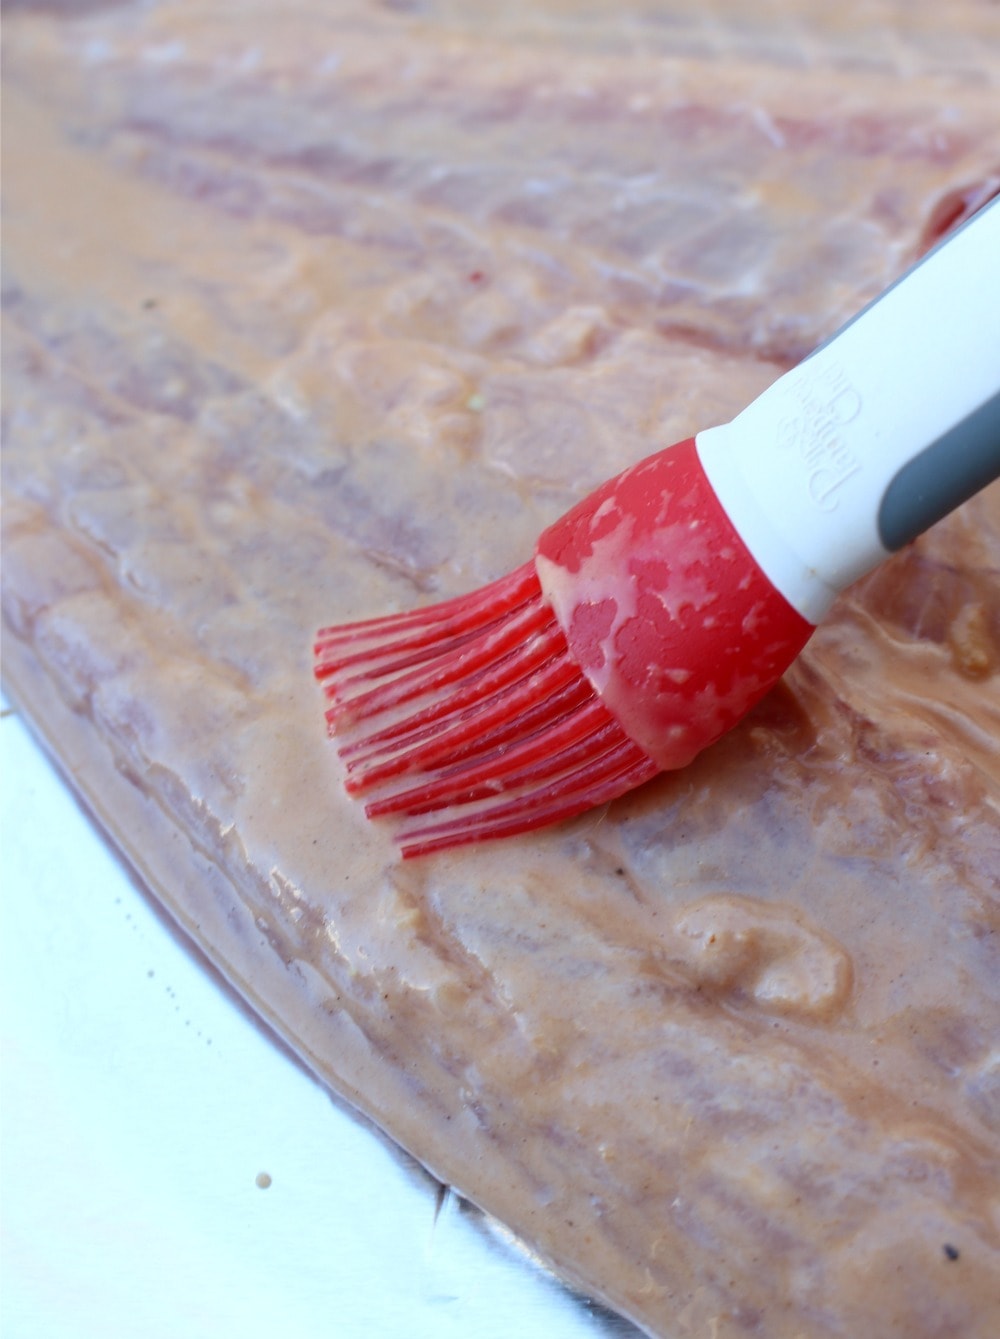 A red brush brushing the marinating sauce on a fish.